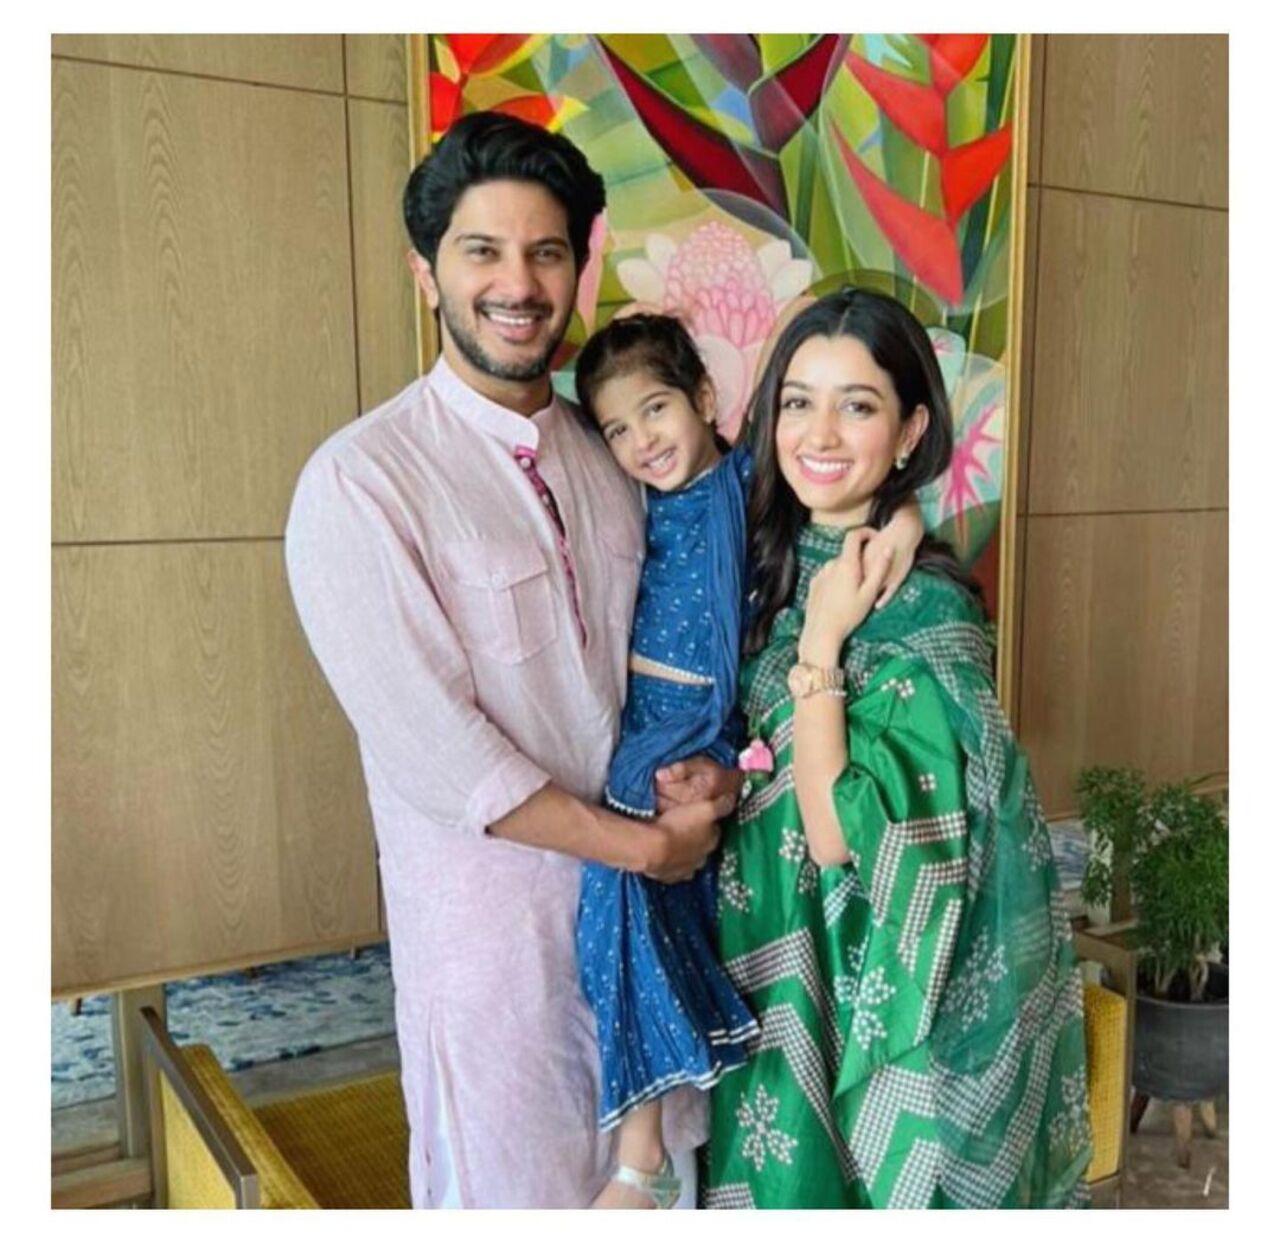 Dulquer, too, got married before entering the movies. He married Amal Sufiya and the two have a beautiful daughter